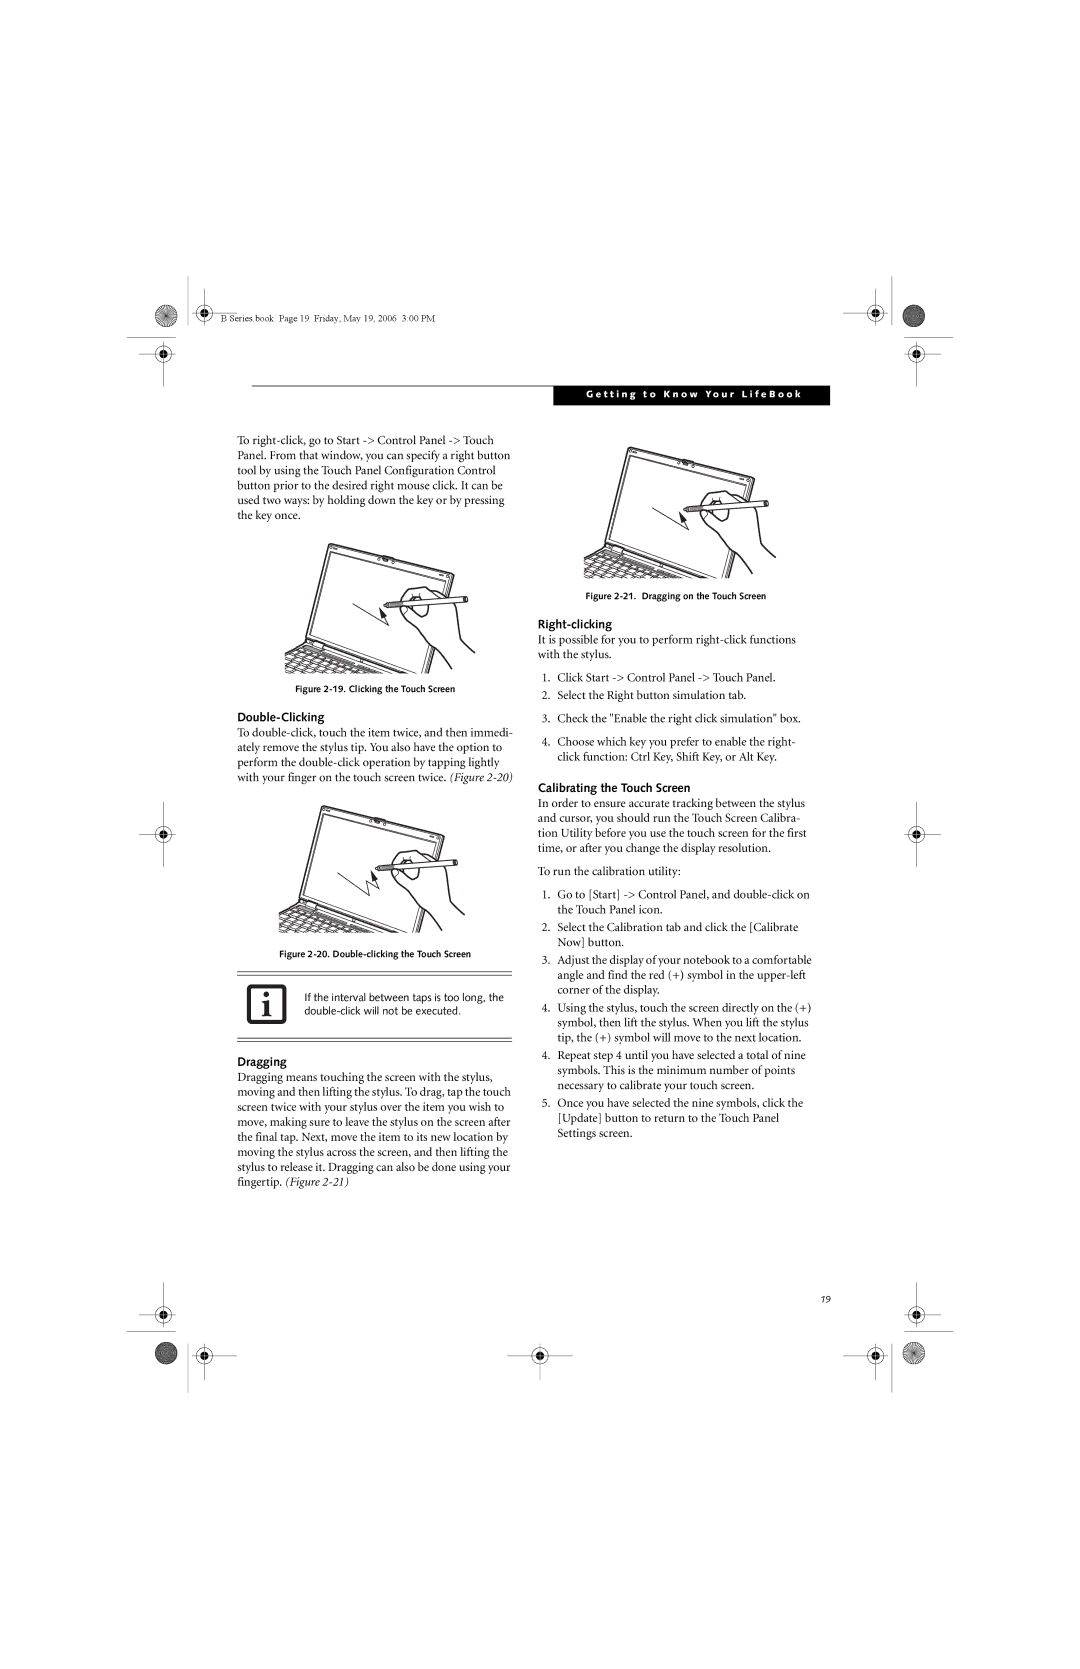 Fujitsu Siemens Computers B6210 manual Double-Clicking, Dragging, Right-clicking, Calibrating the Touch Screen 